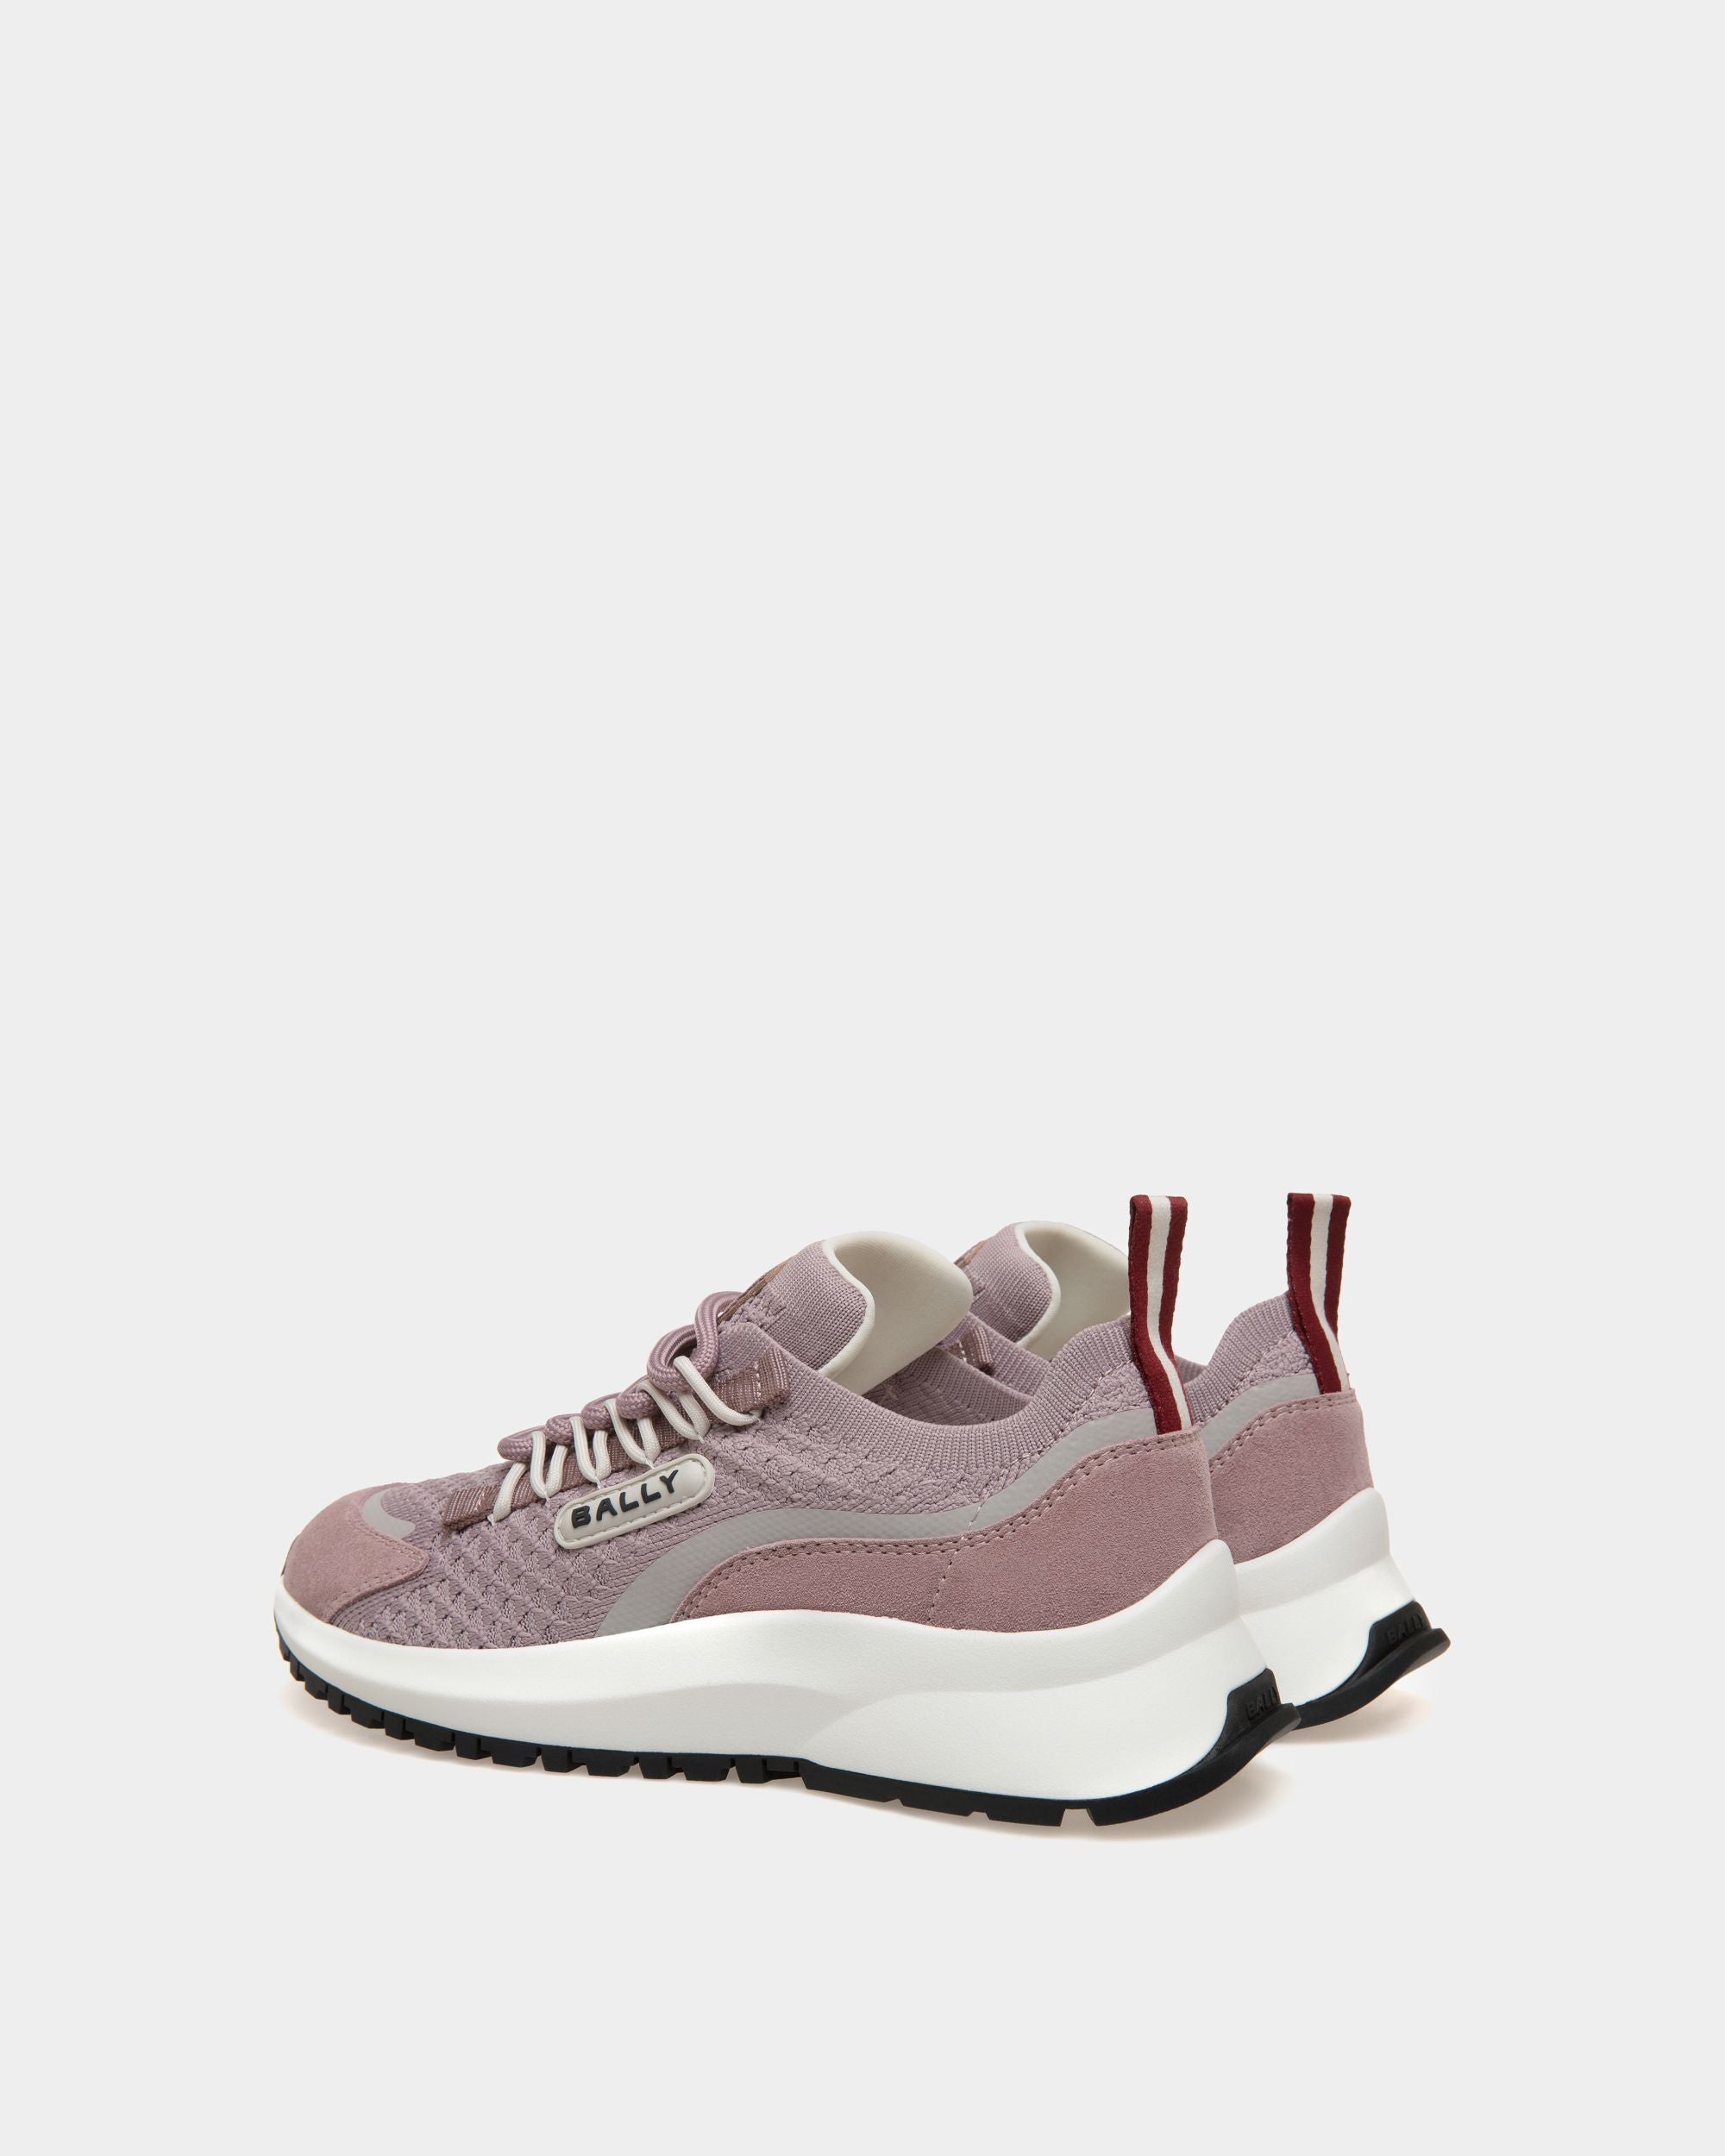 Outline | Women's Low-top Sneaker in Lilac Knit Fabric | Bally | Still Life 3/4 Back